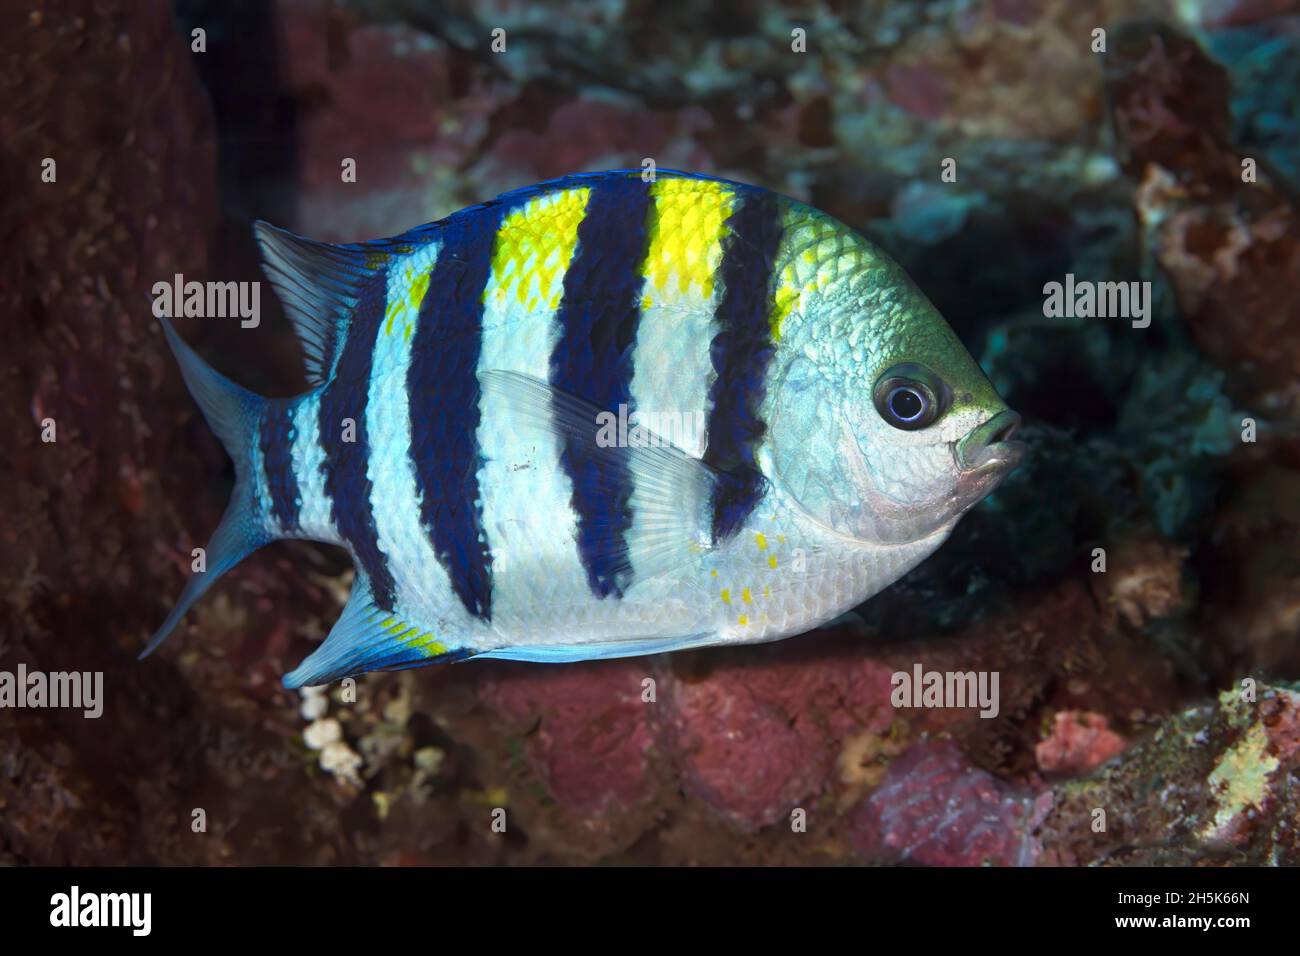 Close-up portrait of an Indo Pacific Sergeant fish (Abudefduf vaigiensis); Maui, Hawaii, United States of America Stock Photo